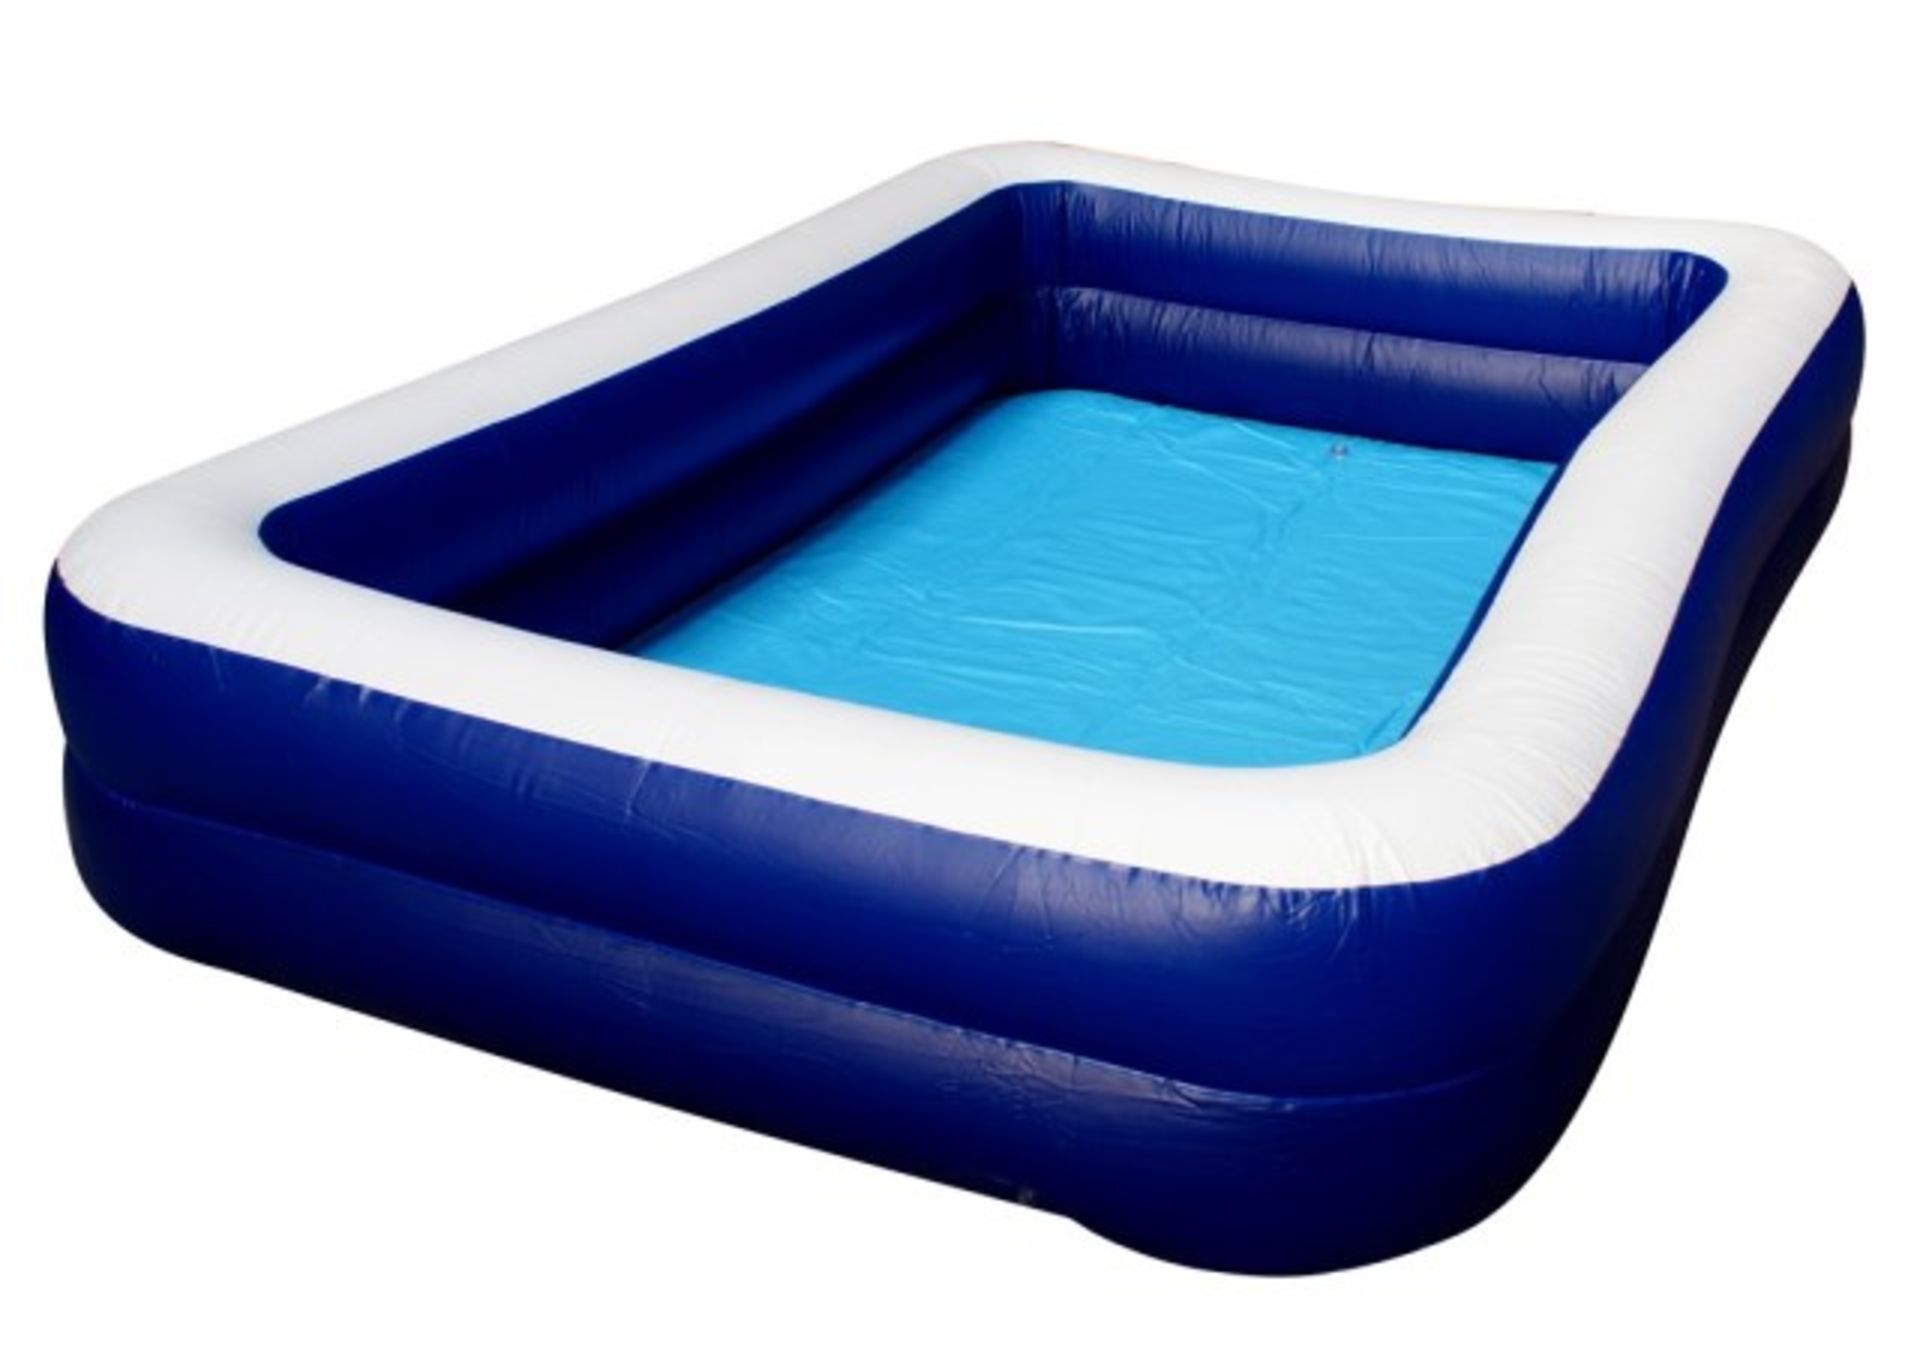 V *TRADE QTY* Brand New Family Paddling Pool 175x262x50cm X 45 YOUR BID PRICE TO BE MULTIPLIED BY